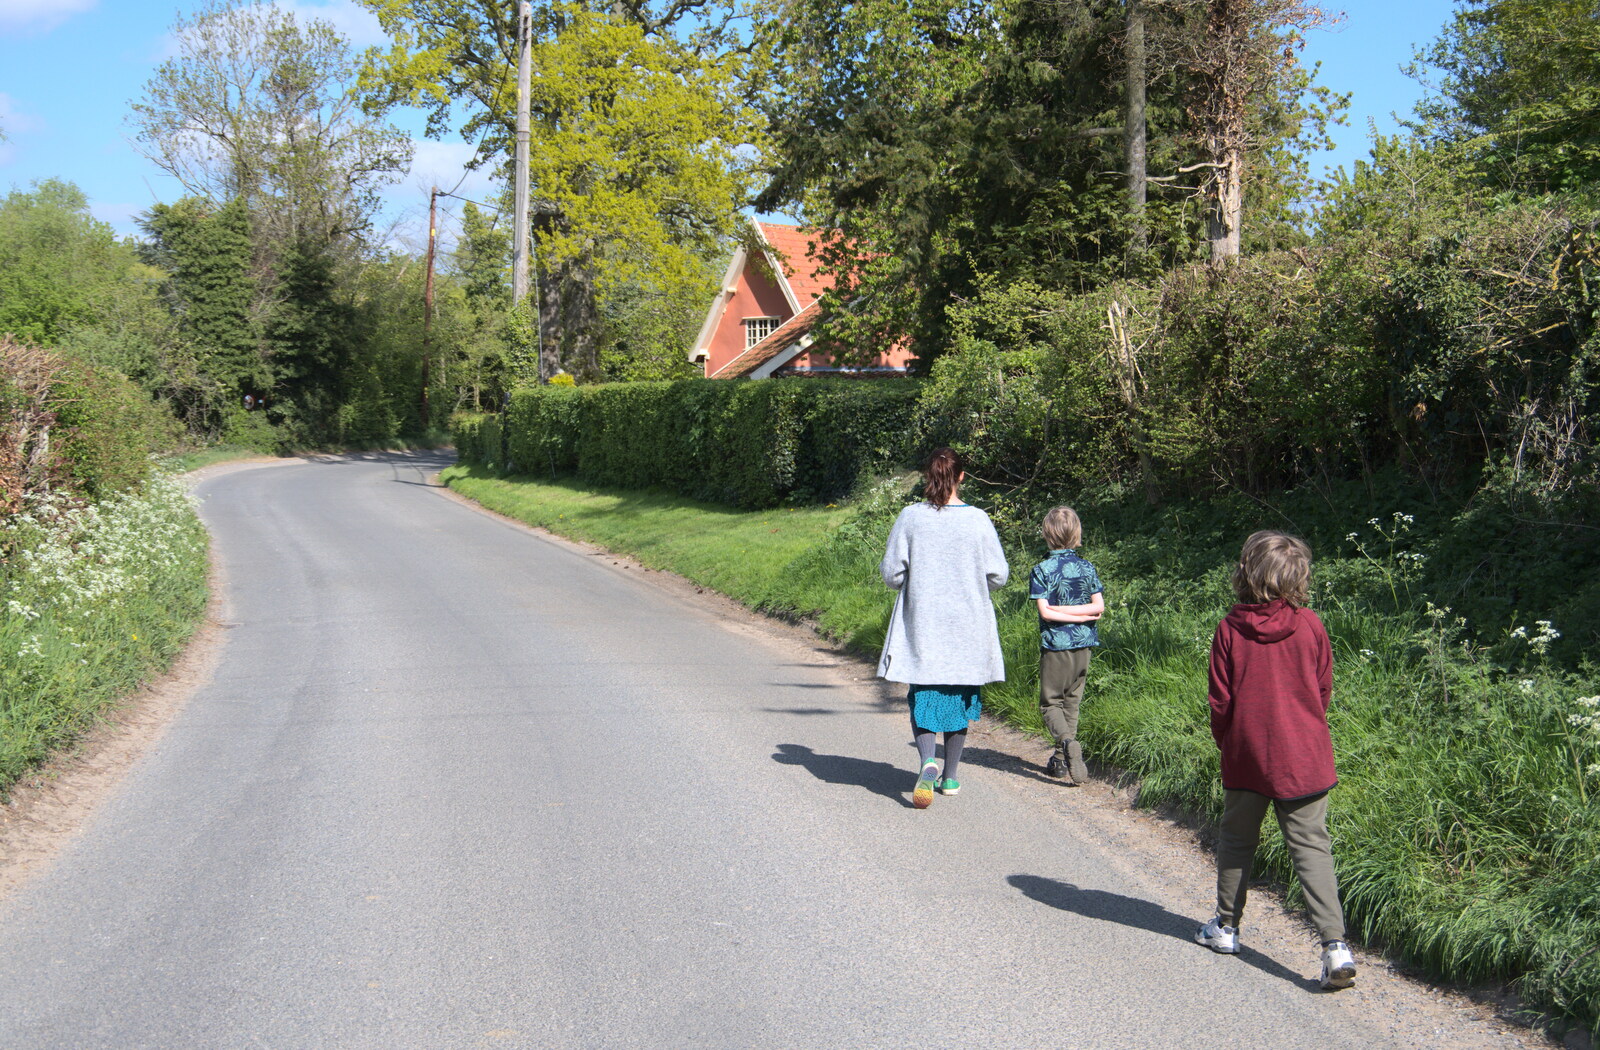 We wander up Brome Street from Lost Cat and a Walk on Nick's Lane, Brome, Suffolk - 26th April 2020